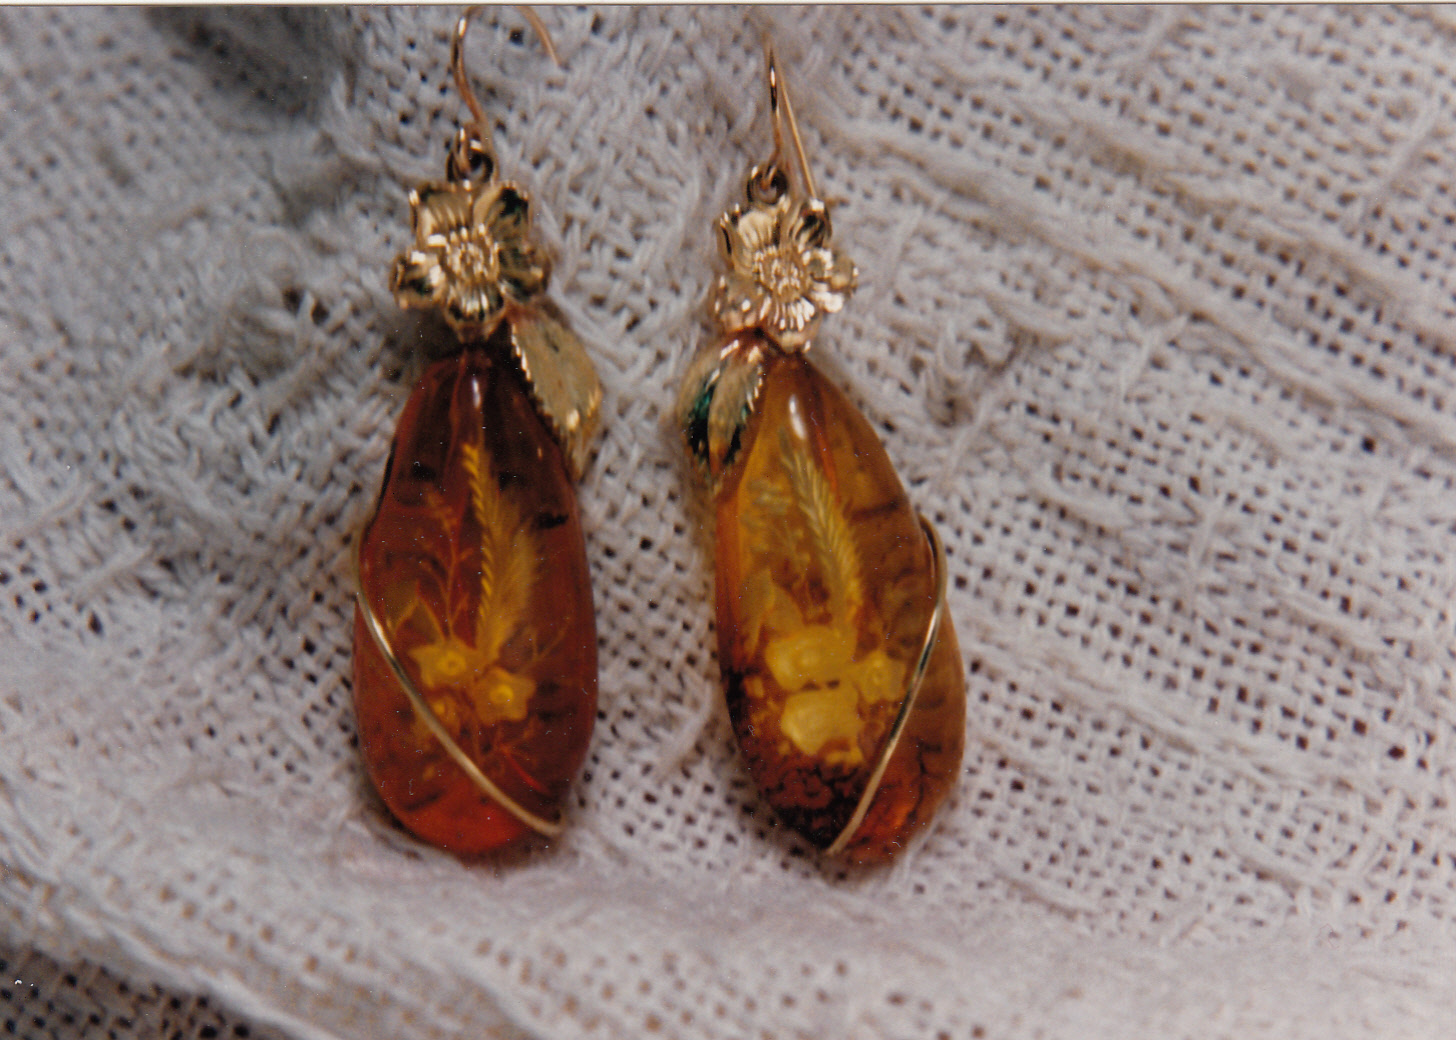 Matching pieces of Amber set in 14 karat gold earring settings.